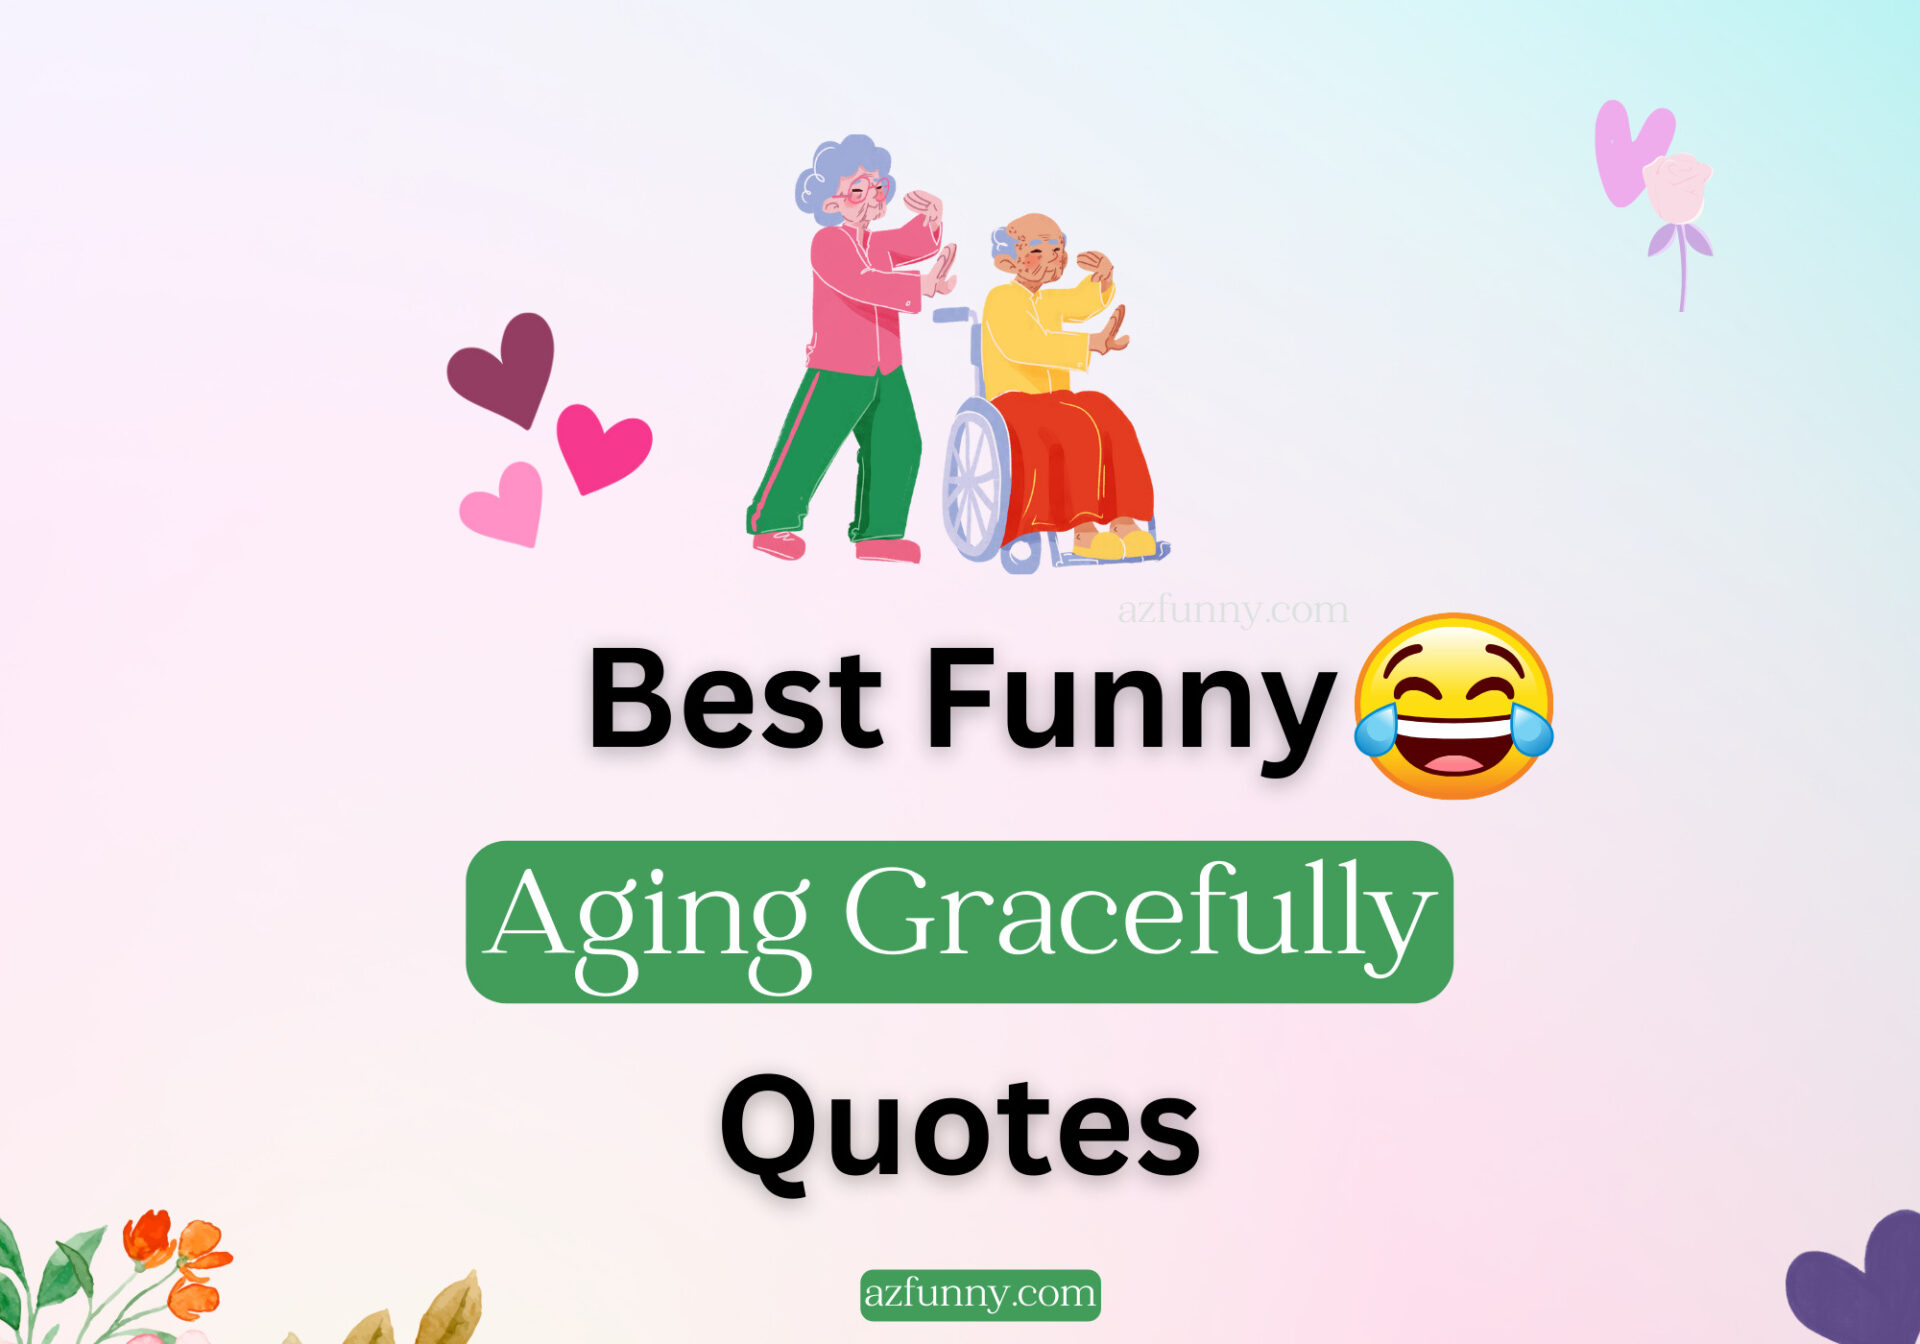 30+ Best Funny Quotes About Aging Gracefully in 2023